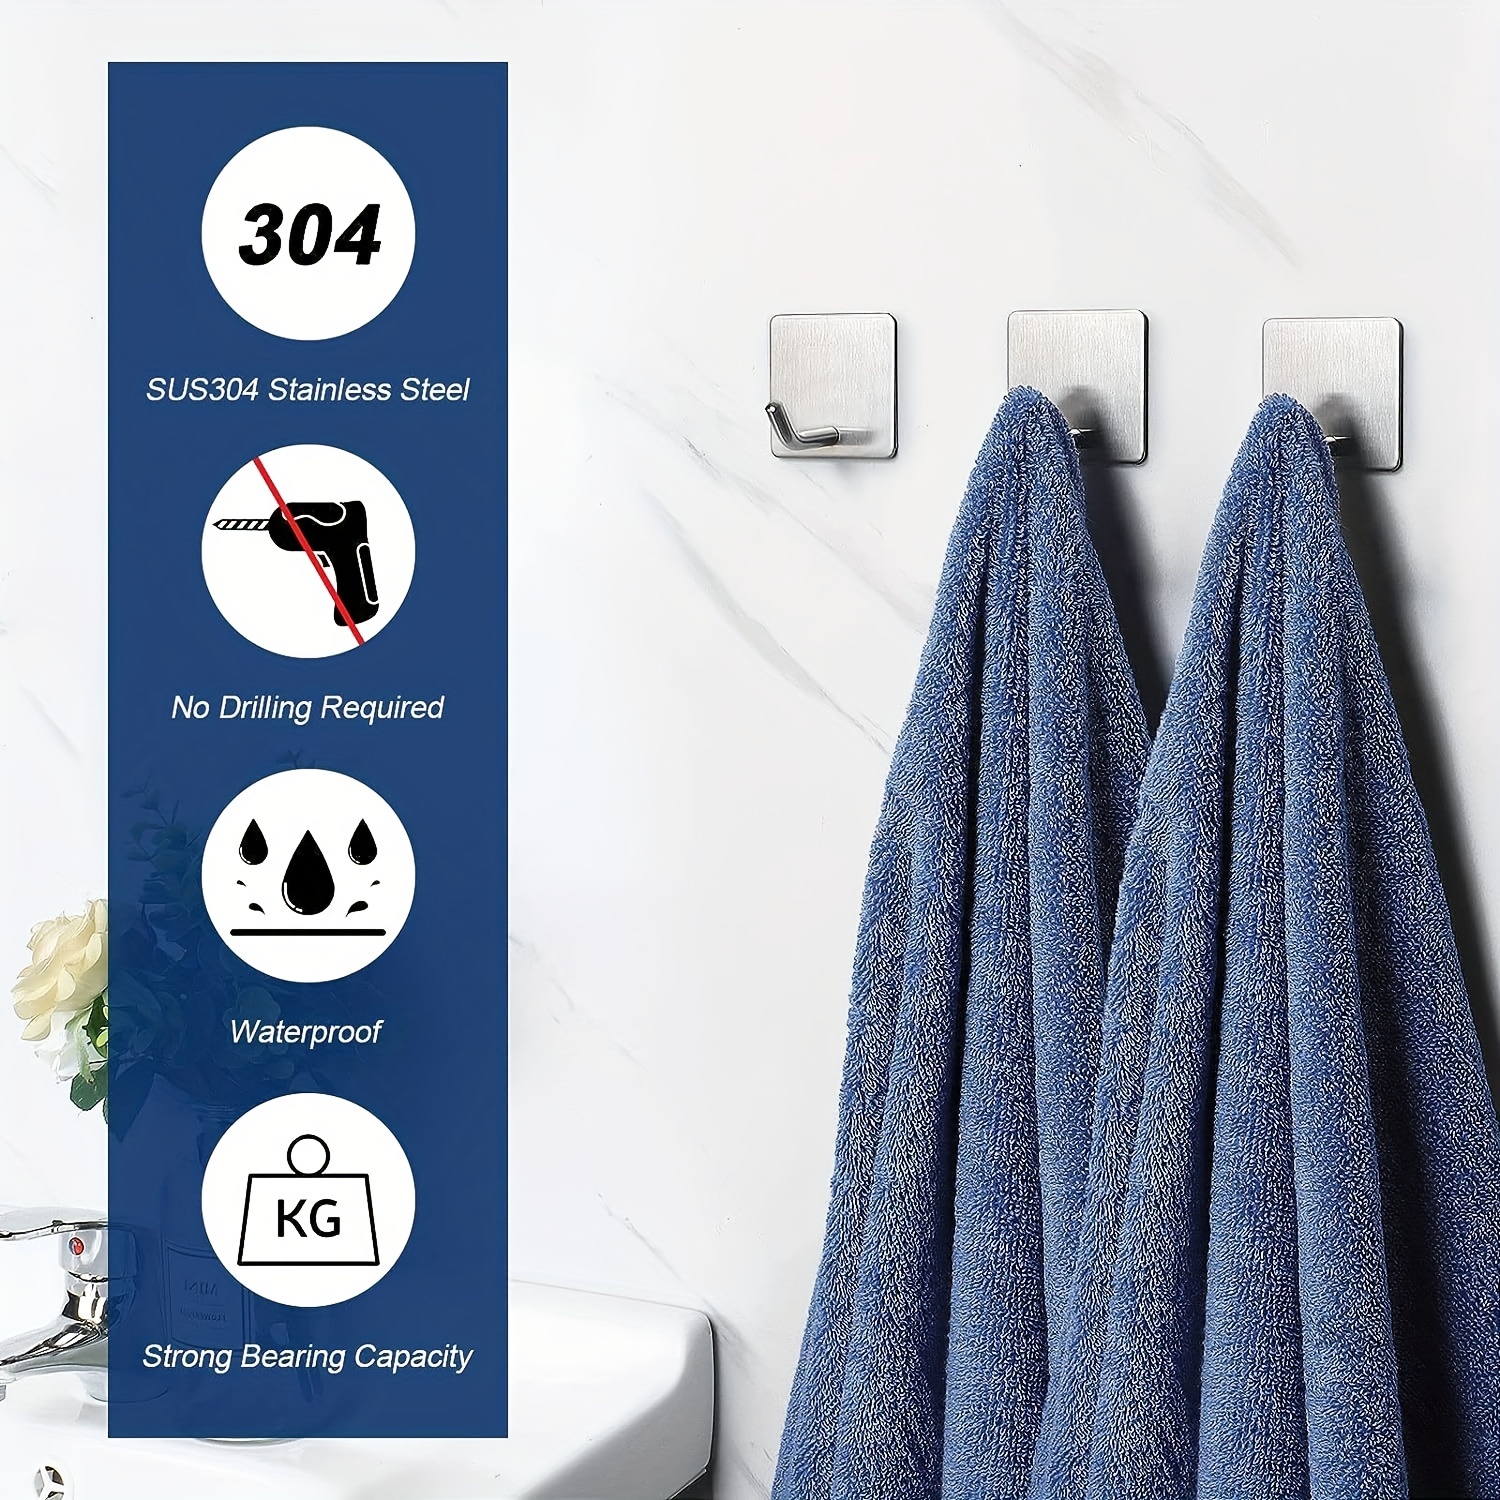 Wall Mounted Coat Rack 4 Hooks Wall Mounted Towel Rack in Brushed Sus 304 Stainless Steel For Bedrooms, Bathrooms, Kitchens (4 Hooks, 30 cm)